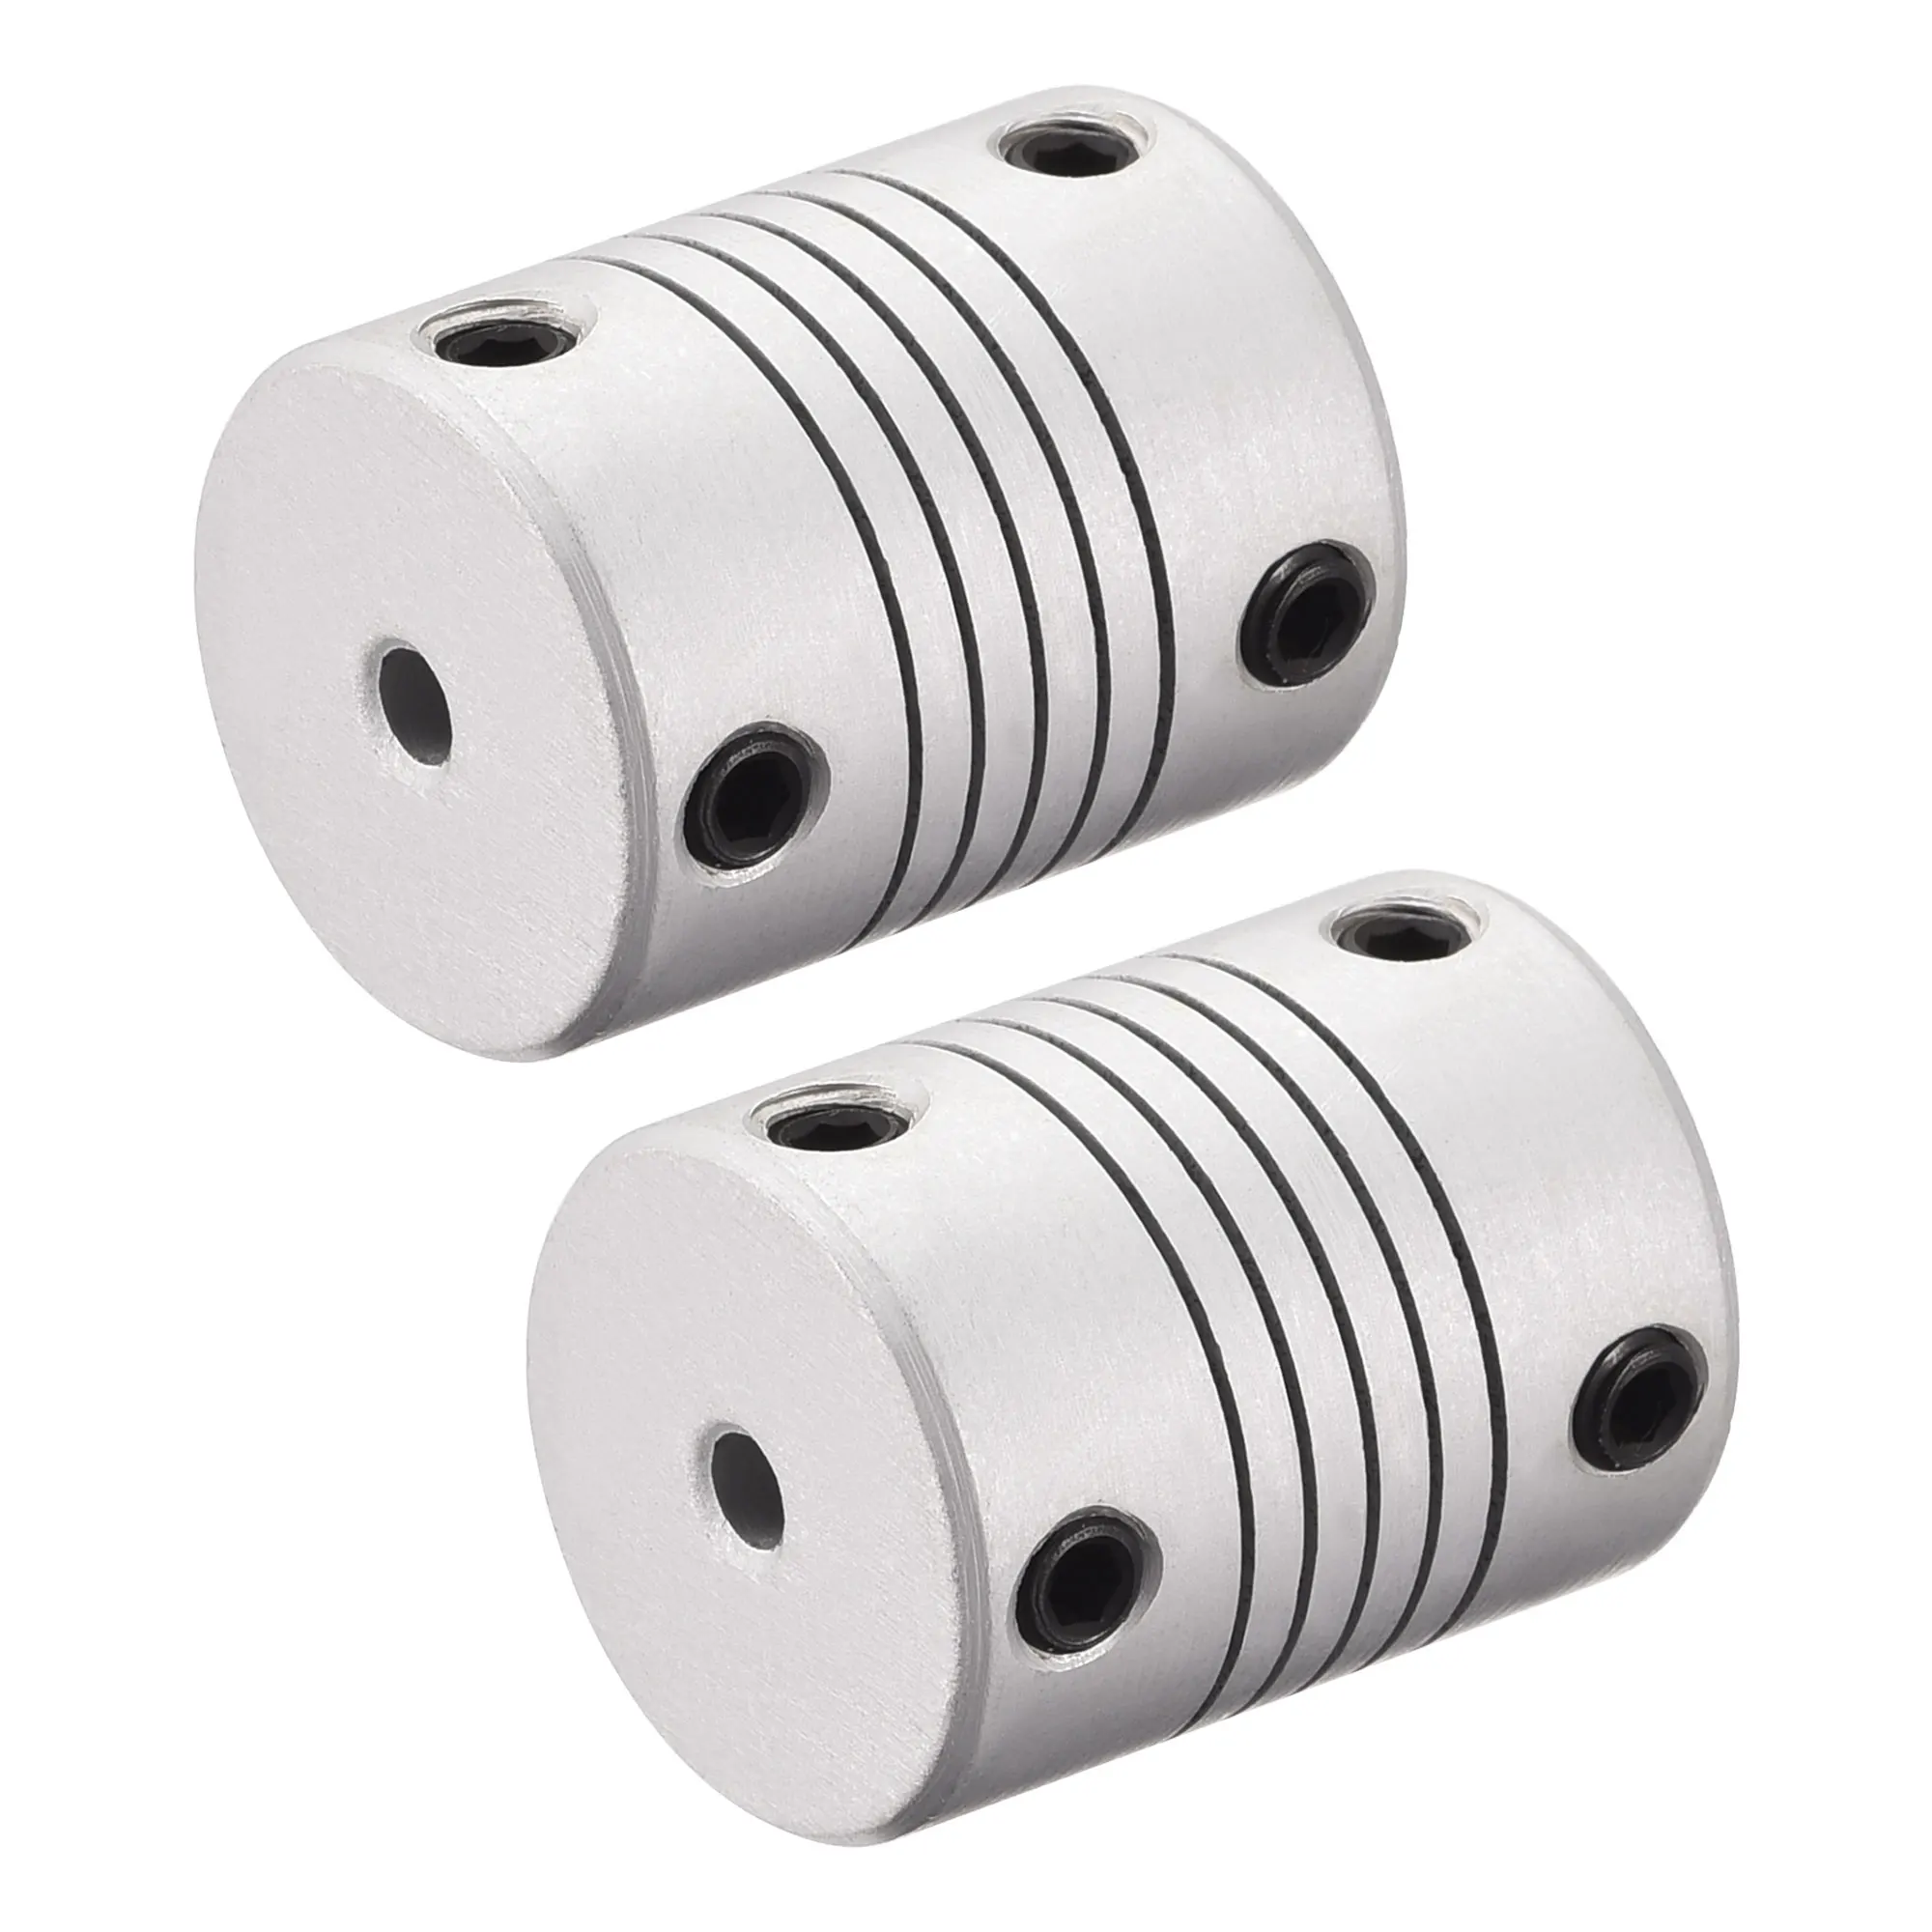 uxcell 2pcs 5mm to 6mm Aluminum Alloy Shaft Coupling Flexible Coupler Motor Connector Joint L25xD19 Silver 